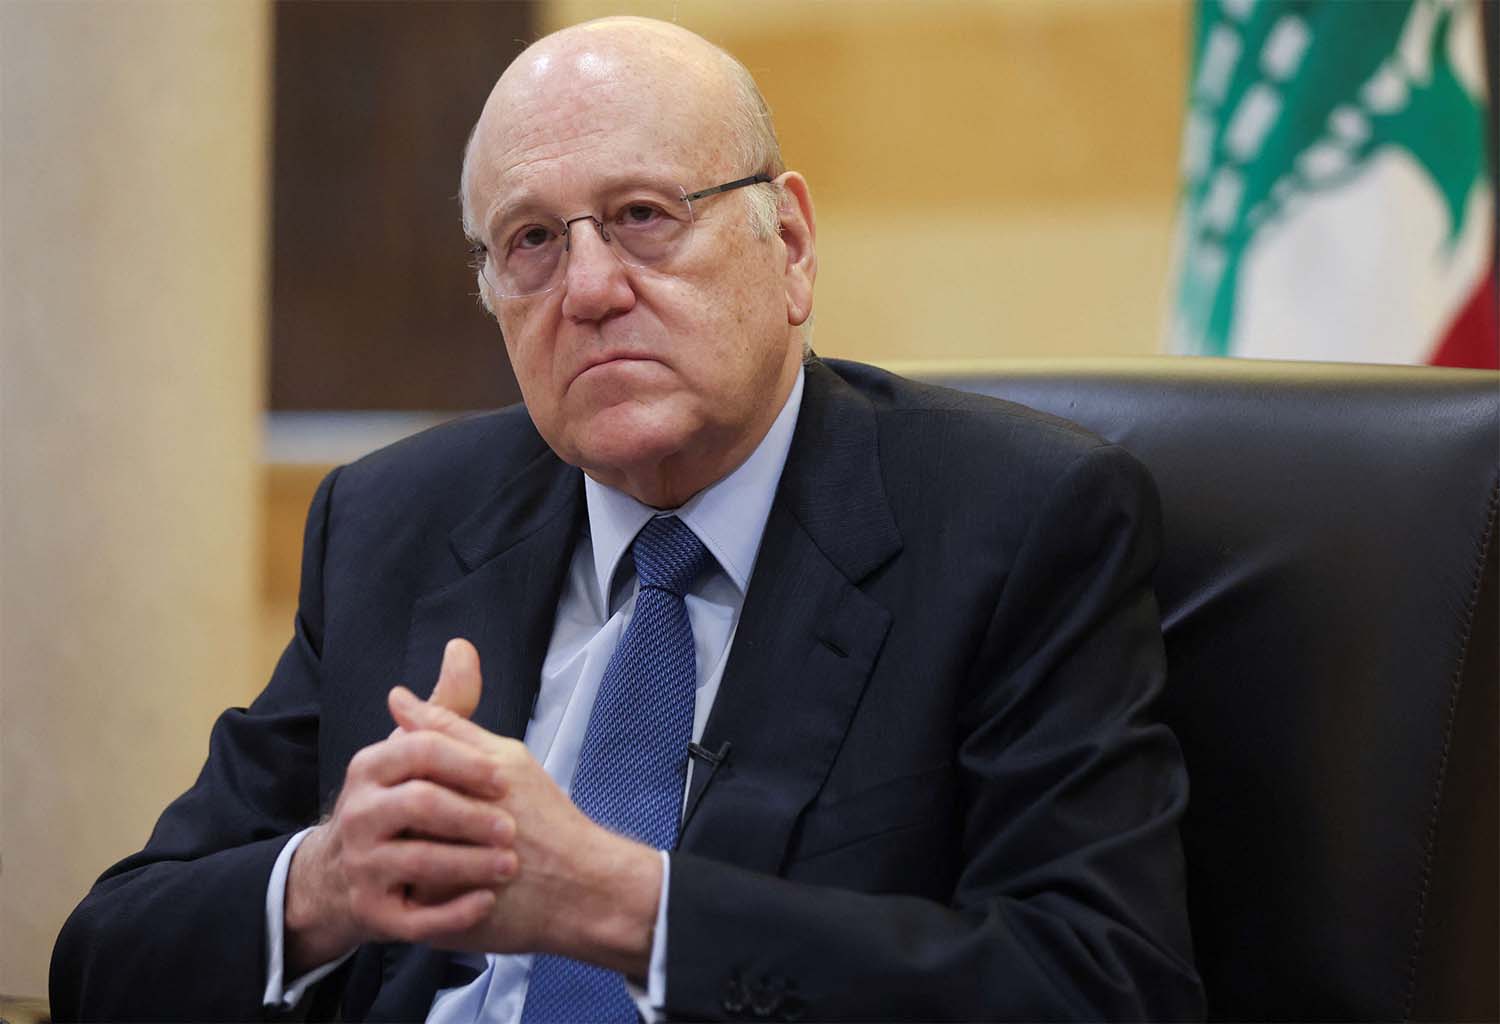 Mikati said Lebanon's parliament speaker was studying a proposal suggested verbally by US envoy Hochstein